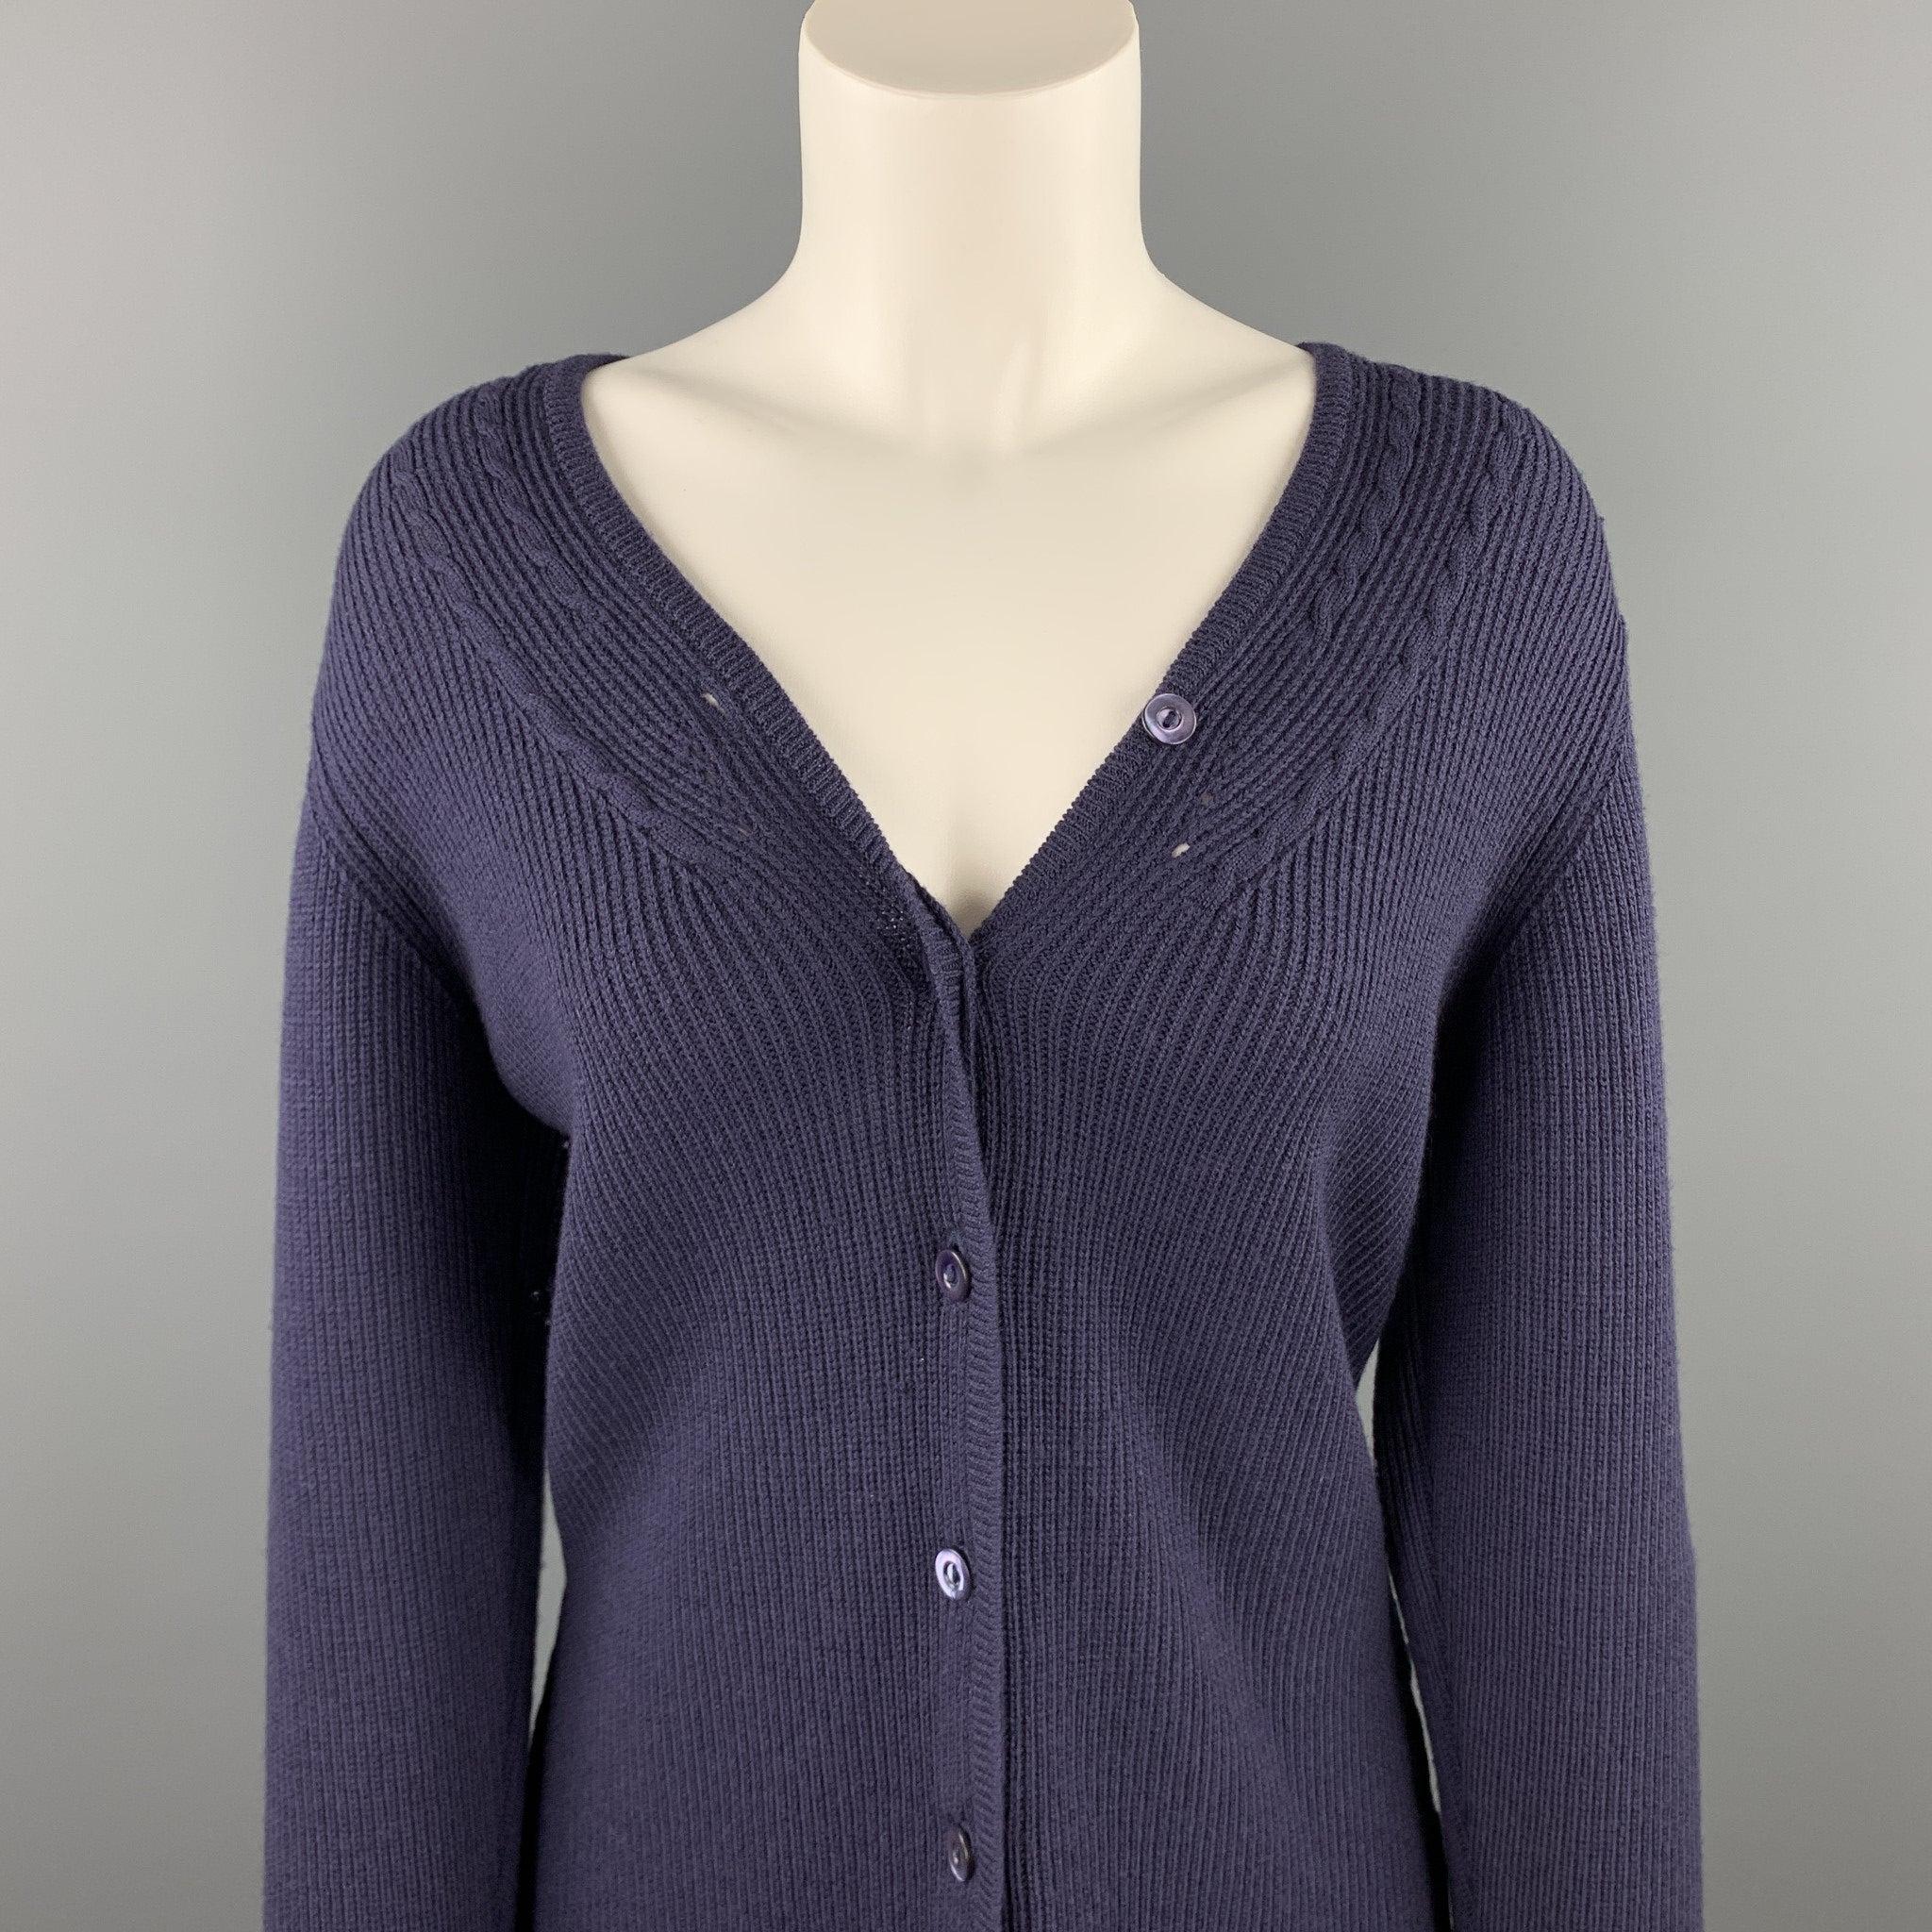 JAEGER cardigan comes in a navy ribbed merino wool featuring a buttoned closure. Made in England.Very Good
Pre-Owned Condition. 

Marked:   M 

Measurements: 
 
Shoulder: 15.5 inches 
Bust: 37 inches 
Sleeve: 26 inches 
Length:
25 inches 
  
  
